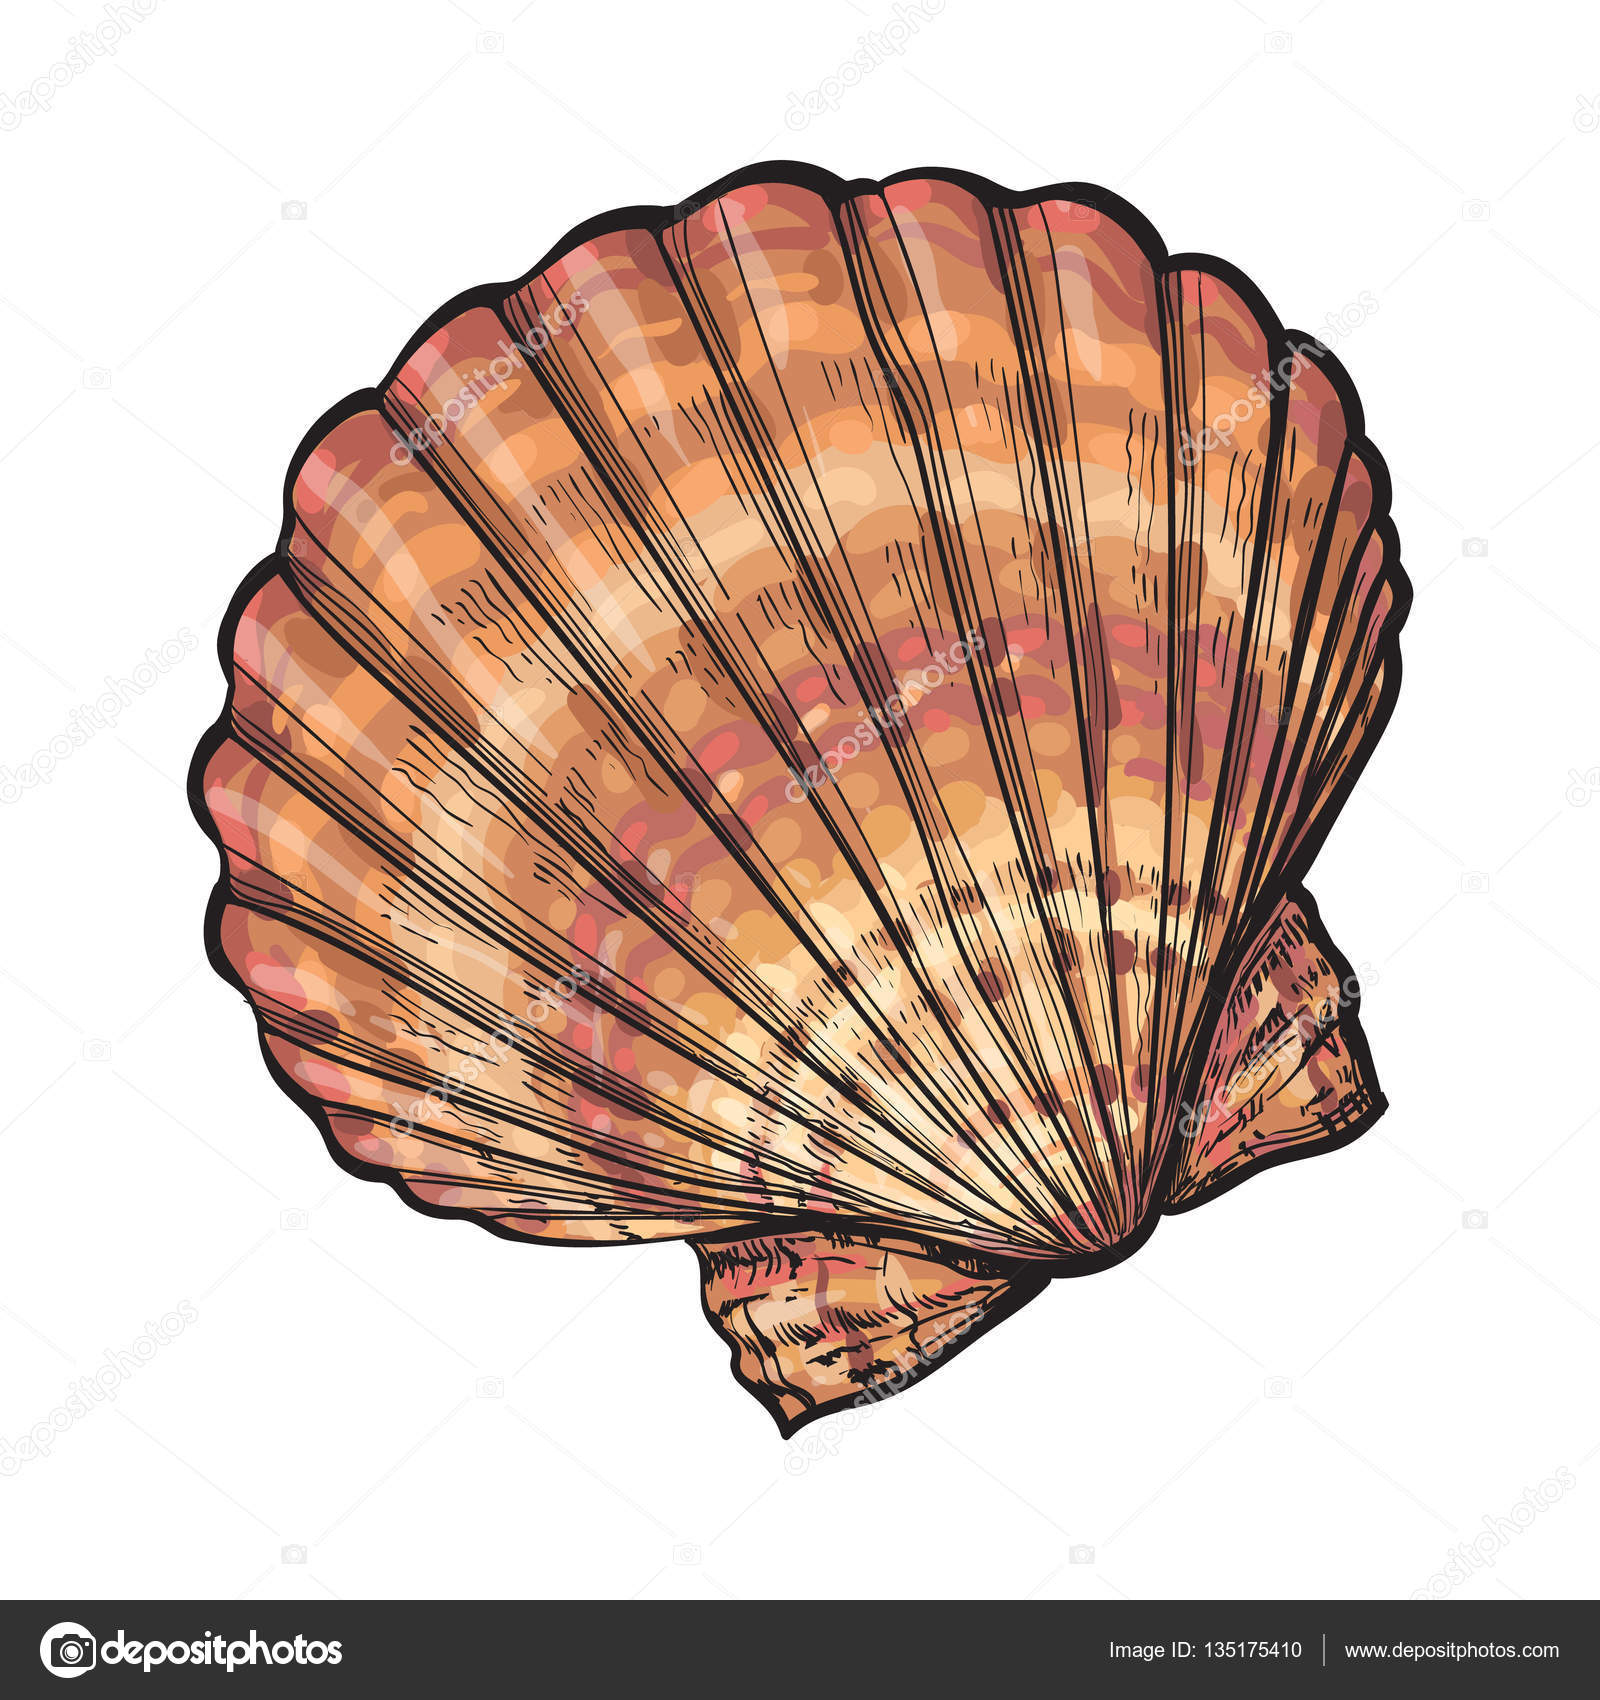 Sea Shell Drawing at GetDrawings.com | Free for personal use Sea ...